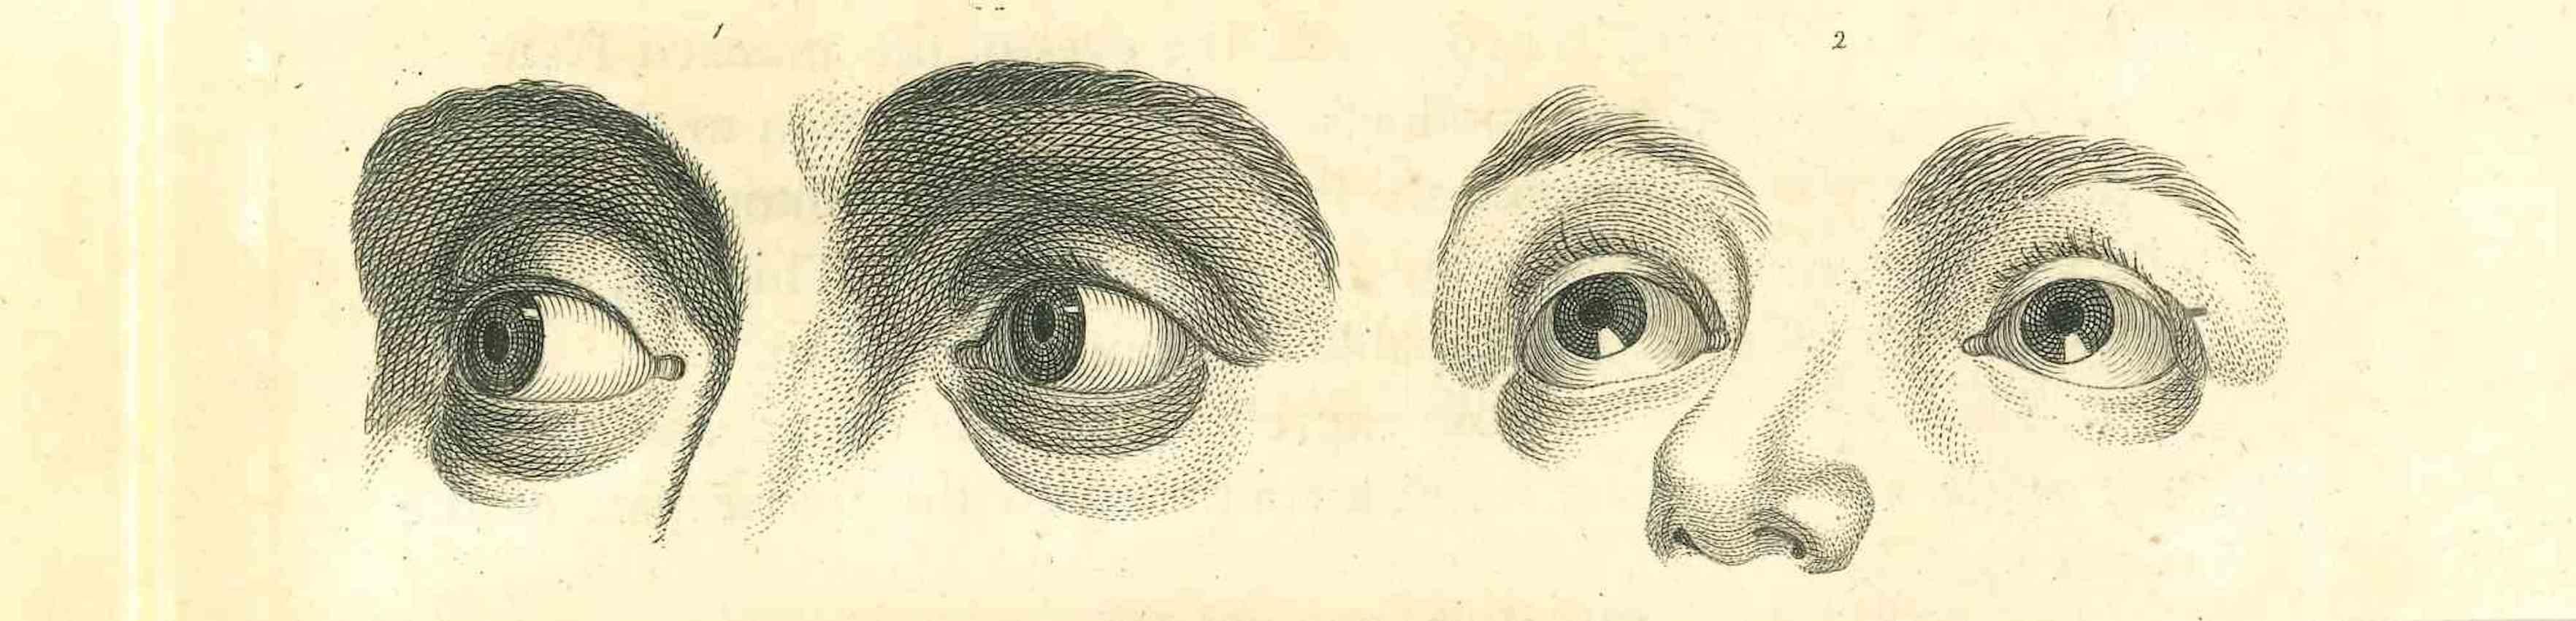 The Physiognomy - The Eyes is an original etching artwork realized by Thomas Holloway for Johann Caspar Lavater's "Essays on Physiognomy, Designed to Promote the Knowledge and the Love of Mankind", London, Bensley, 1810. 

Good conditions.

With